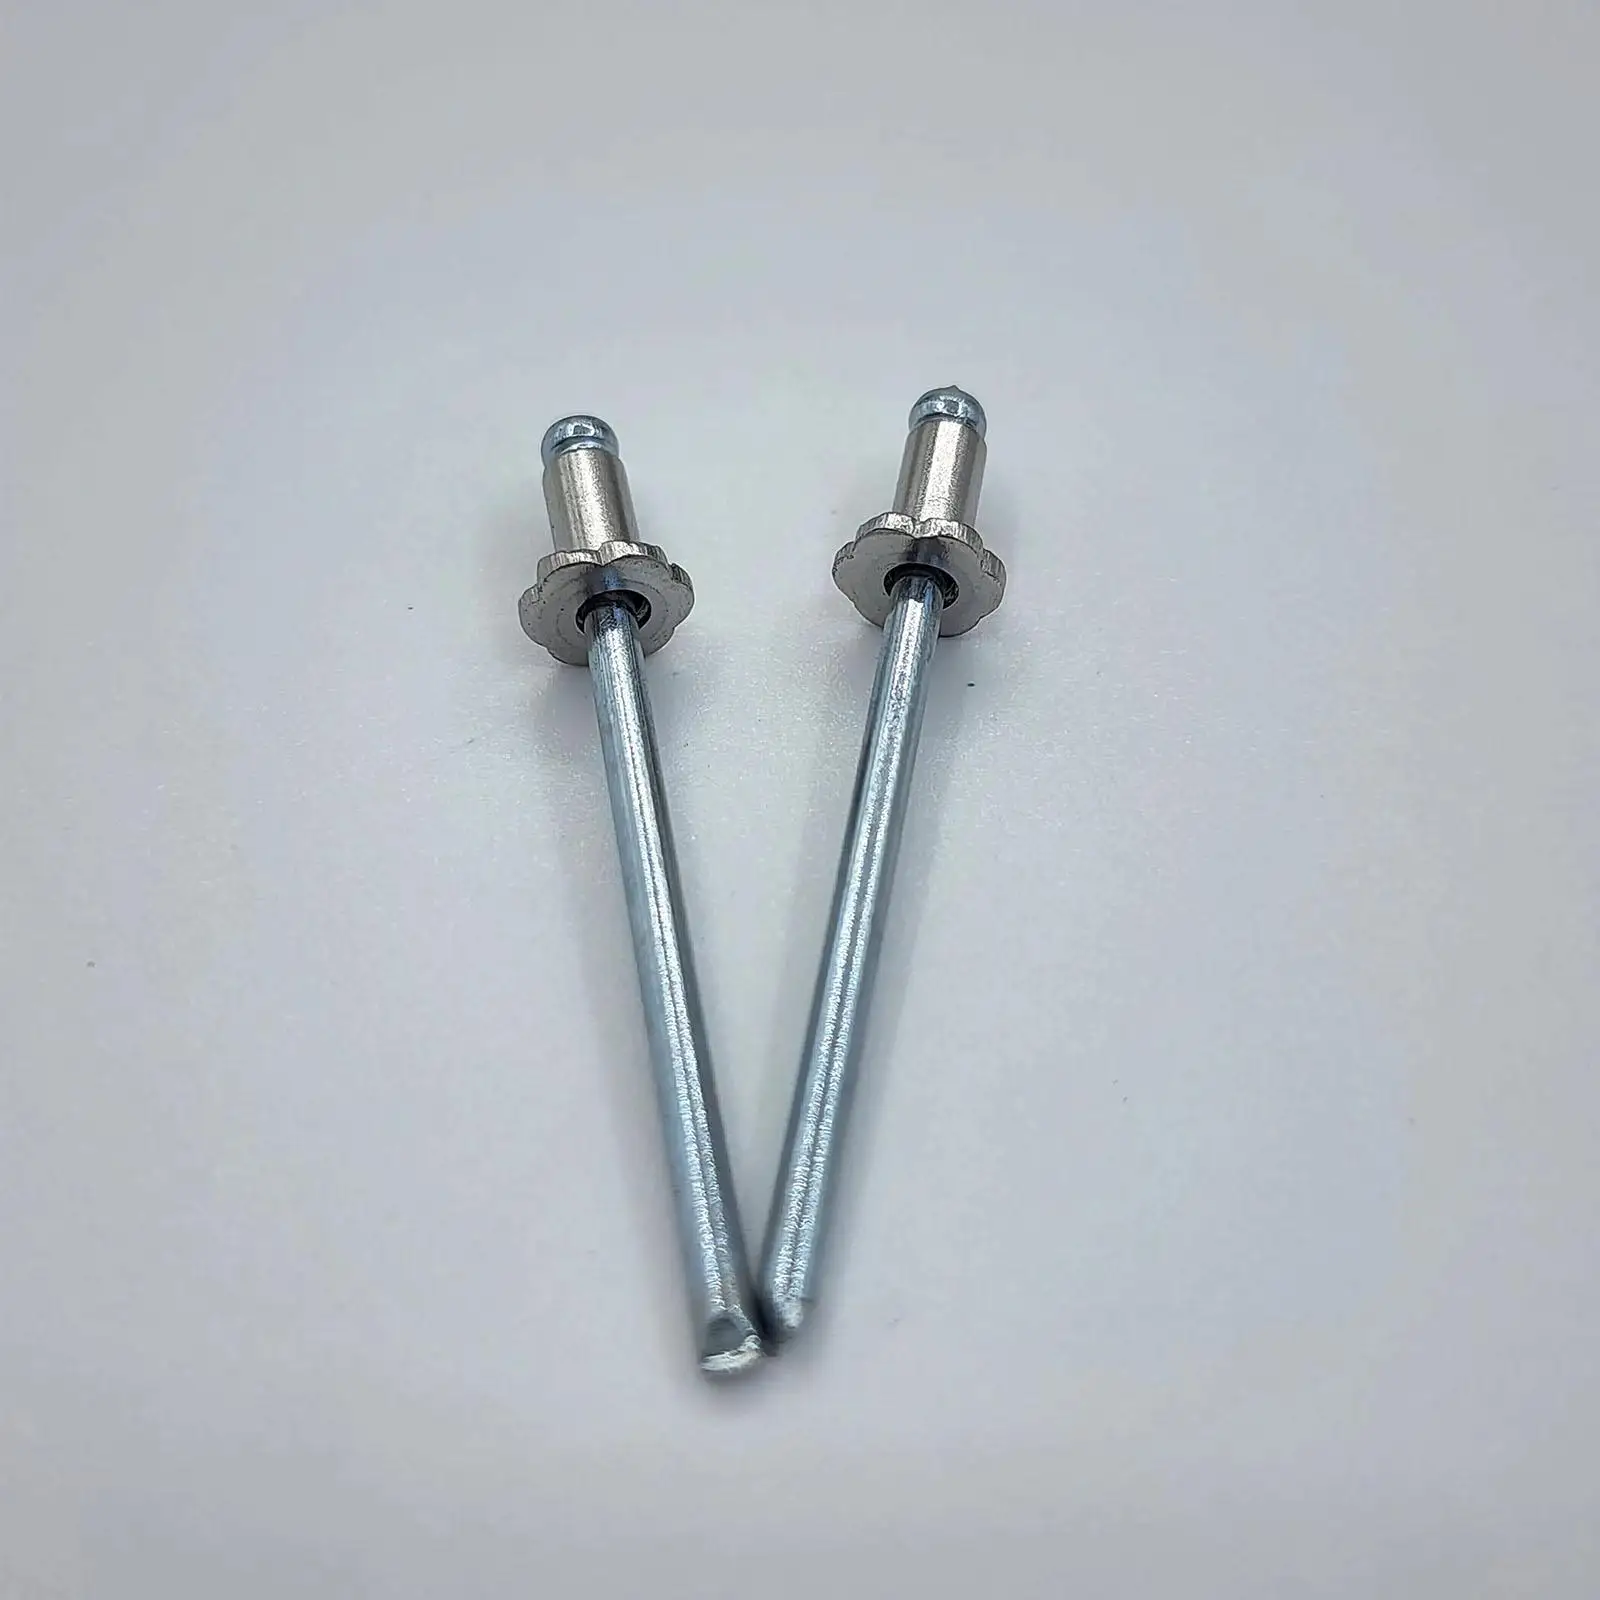 2x Stainless Steel Rosette Rivets Door Tag Rivets Replace Accessory Spare Parts